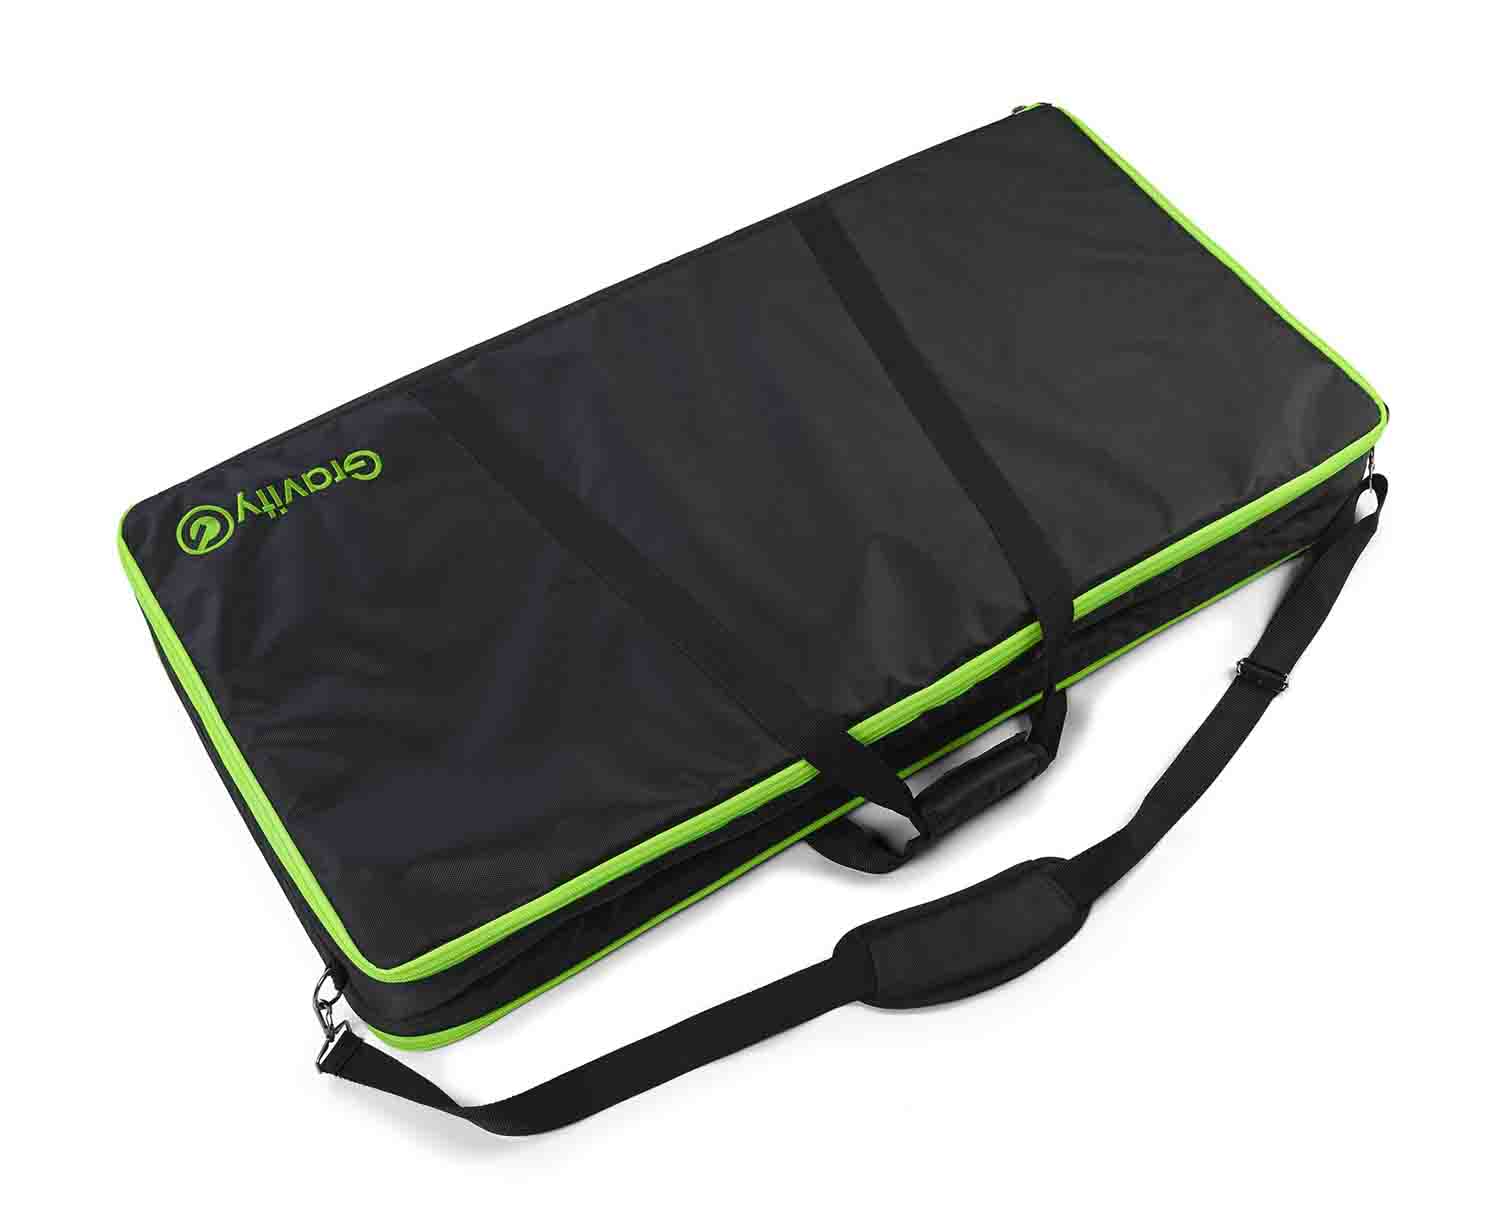 Gravity BG X2 RD B Transport Bag for Rapid Desk and Double X Keyboard Stand - Hollywood DJ